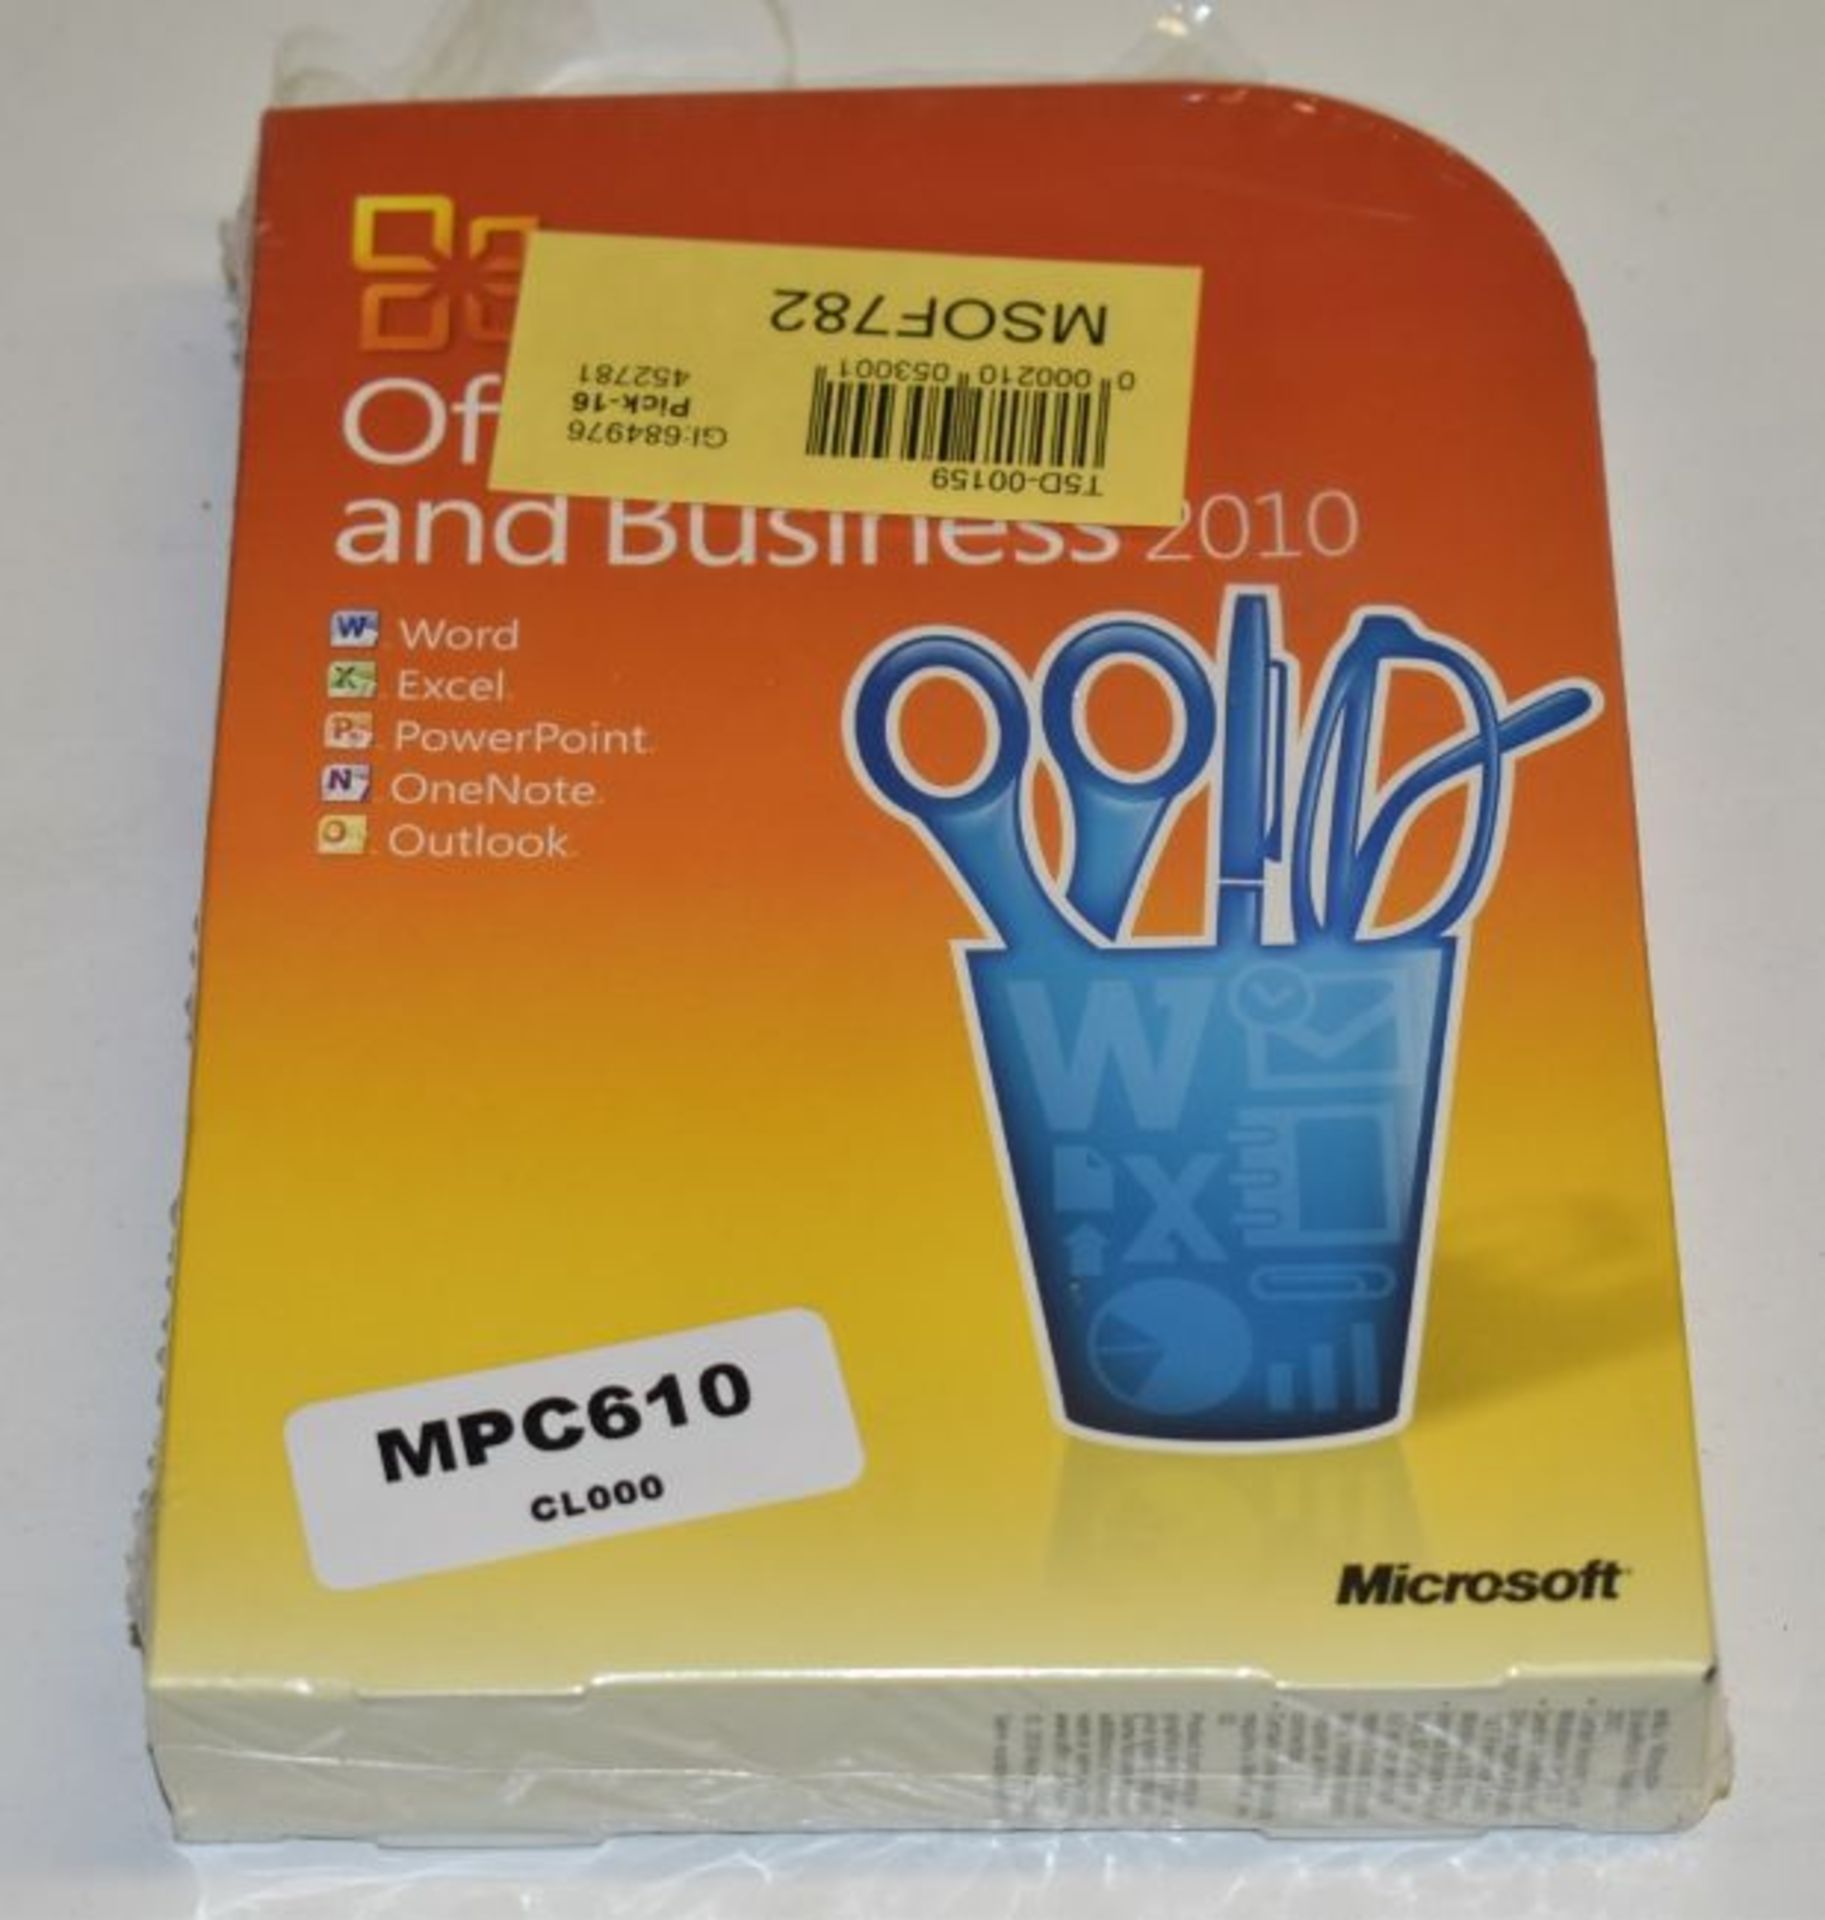 1 x Microsoft Office 2010 Home and Business - Activation Key Card With Original Box - Ref: MPC609 CG - Image 2 of 2